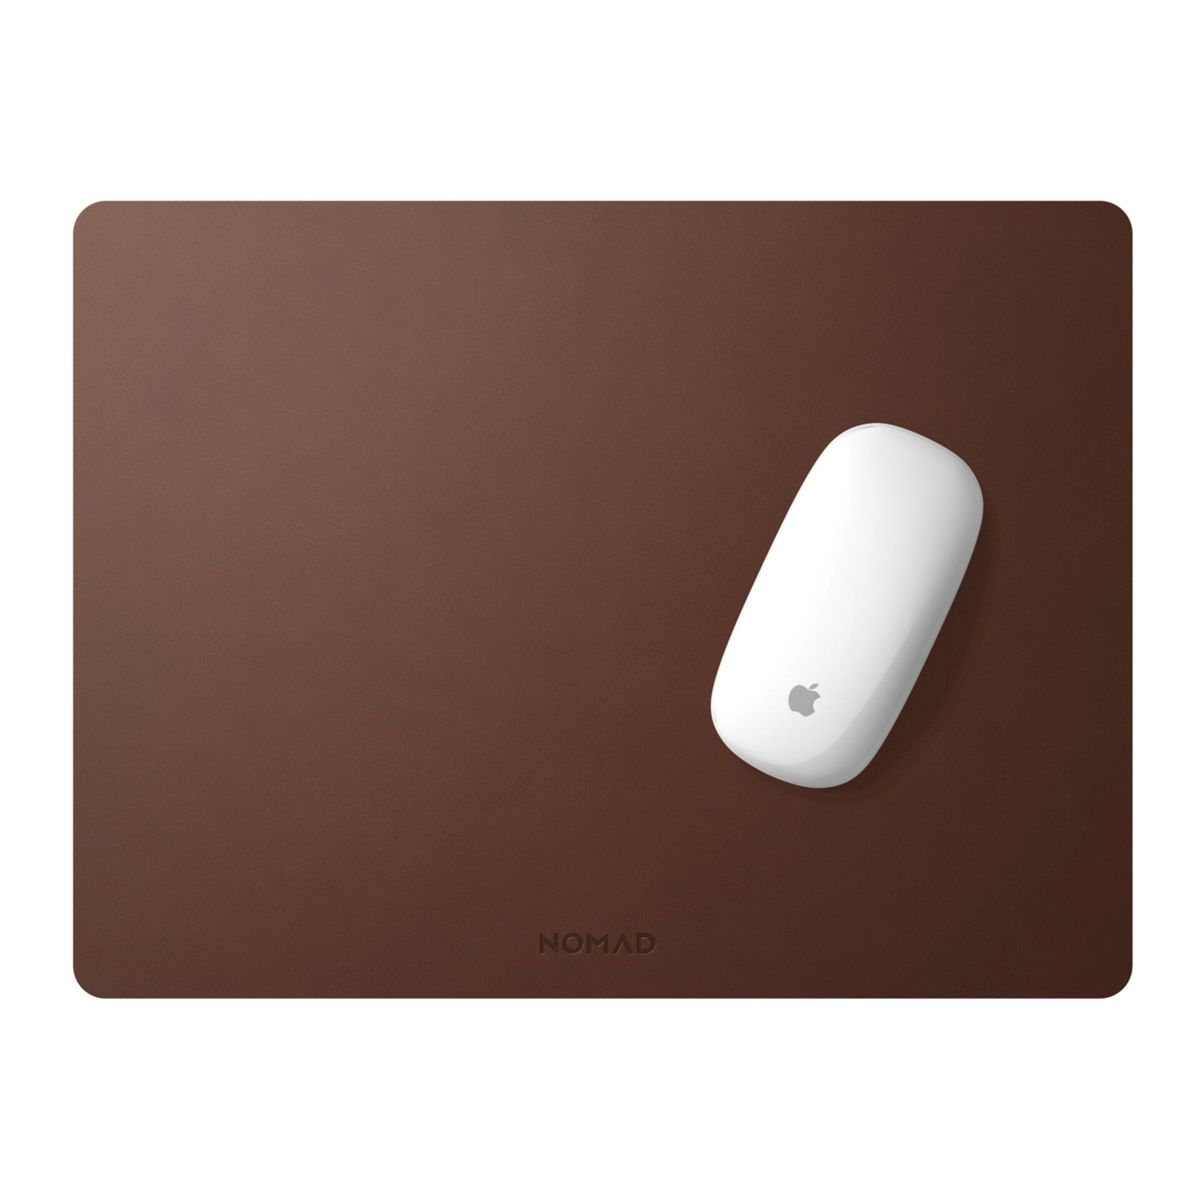 Mousepad Rustic 16-Inch, Brown Leather NOMAD Mauspad